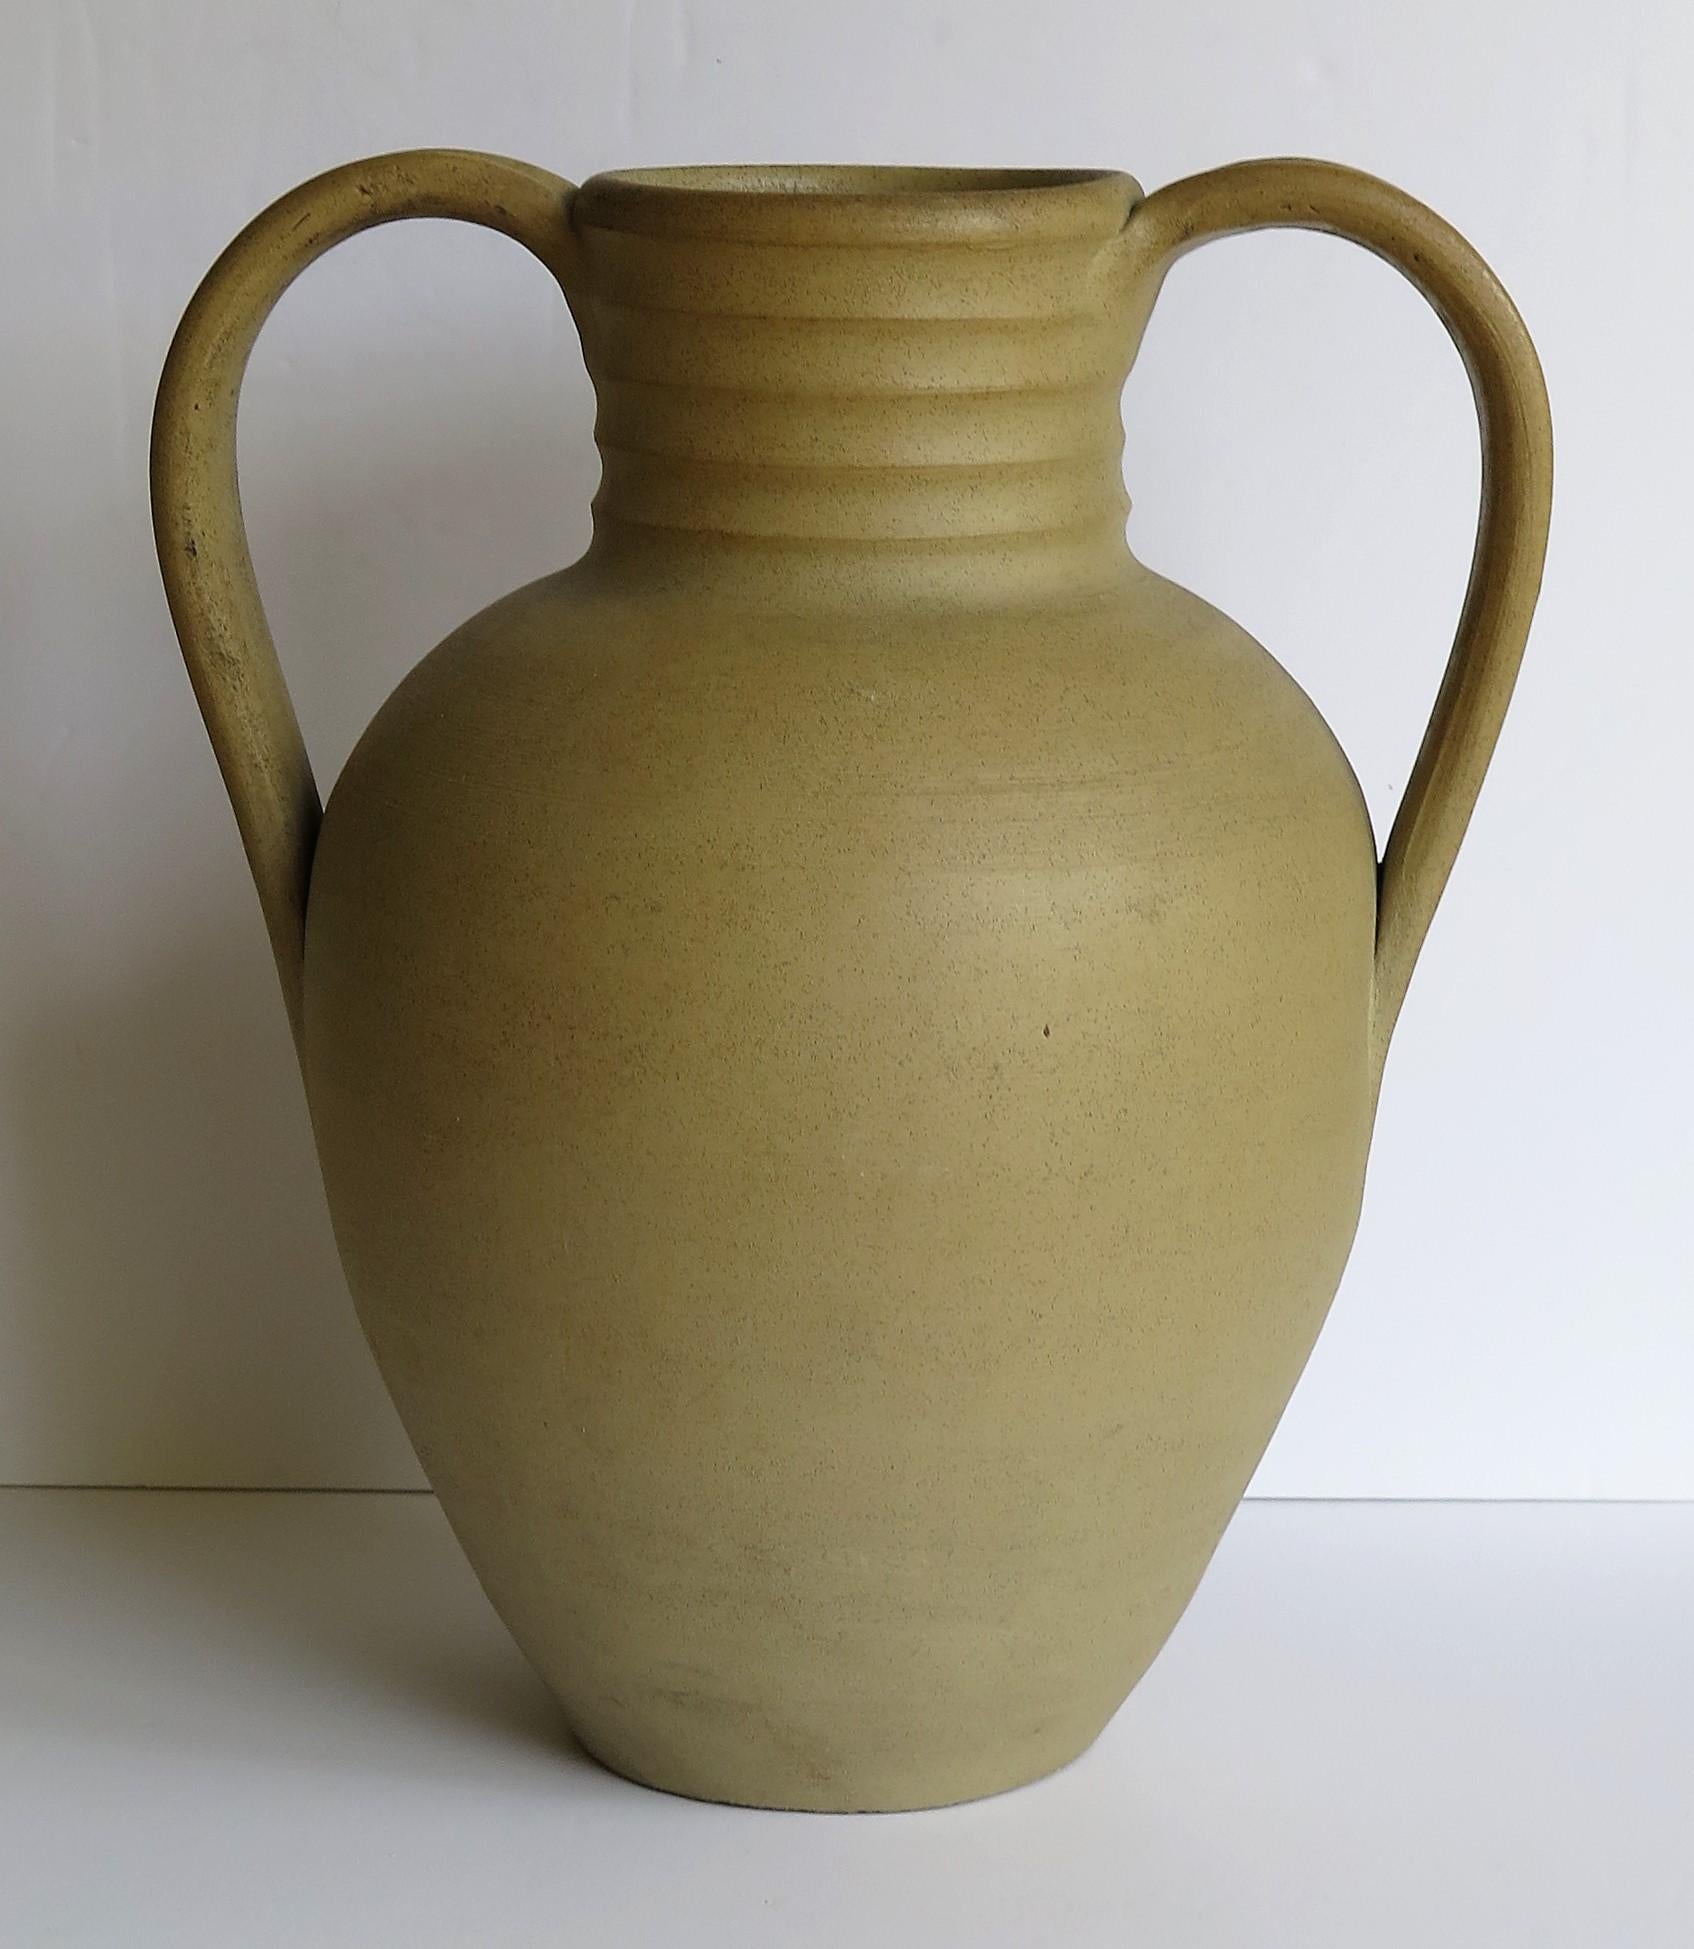 20th Century Large Stoneware Vase or Urn by Moira Pottery Hillstonia Hand Potted, circa 1935 For Sale